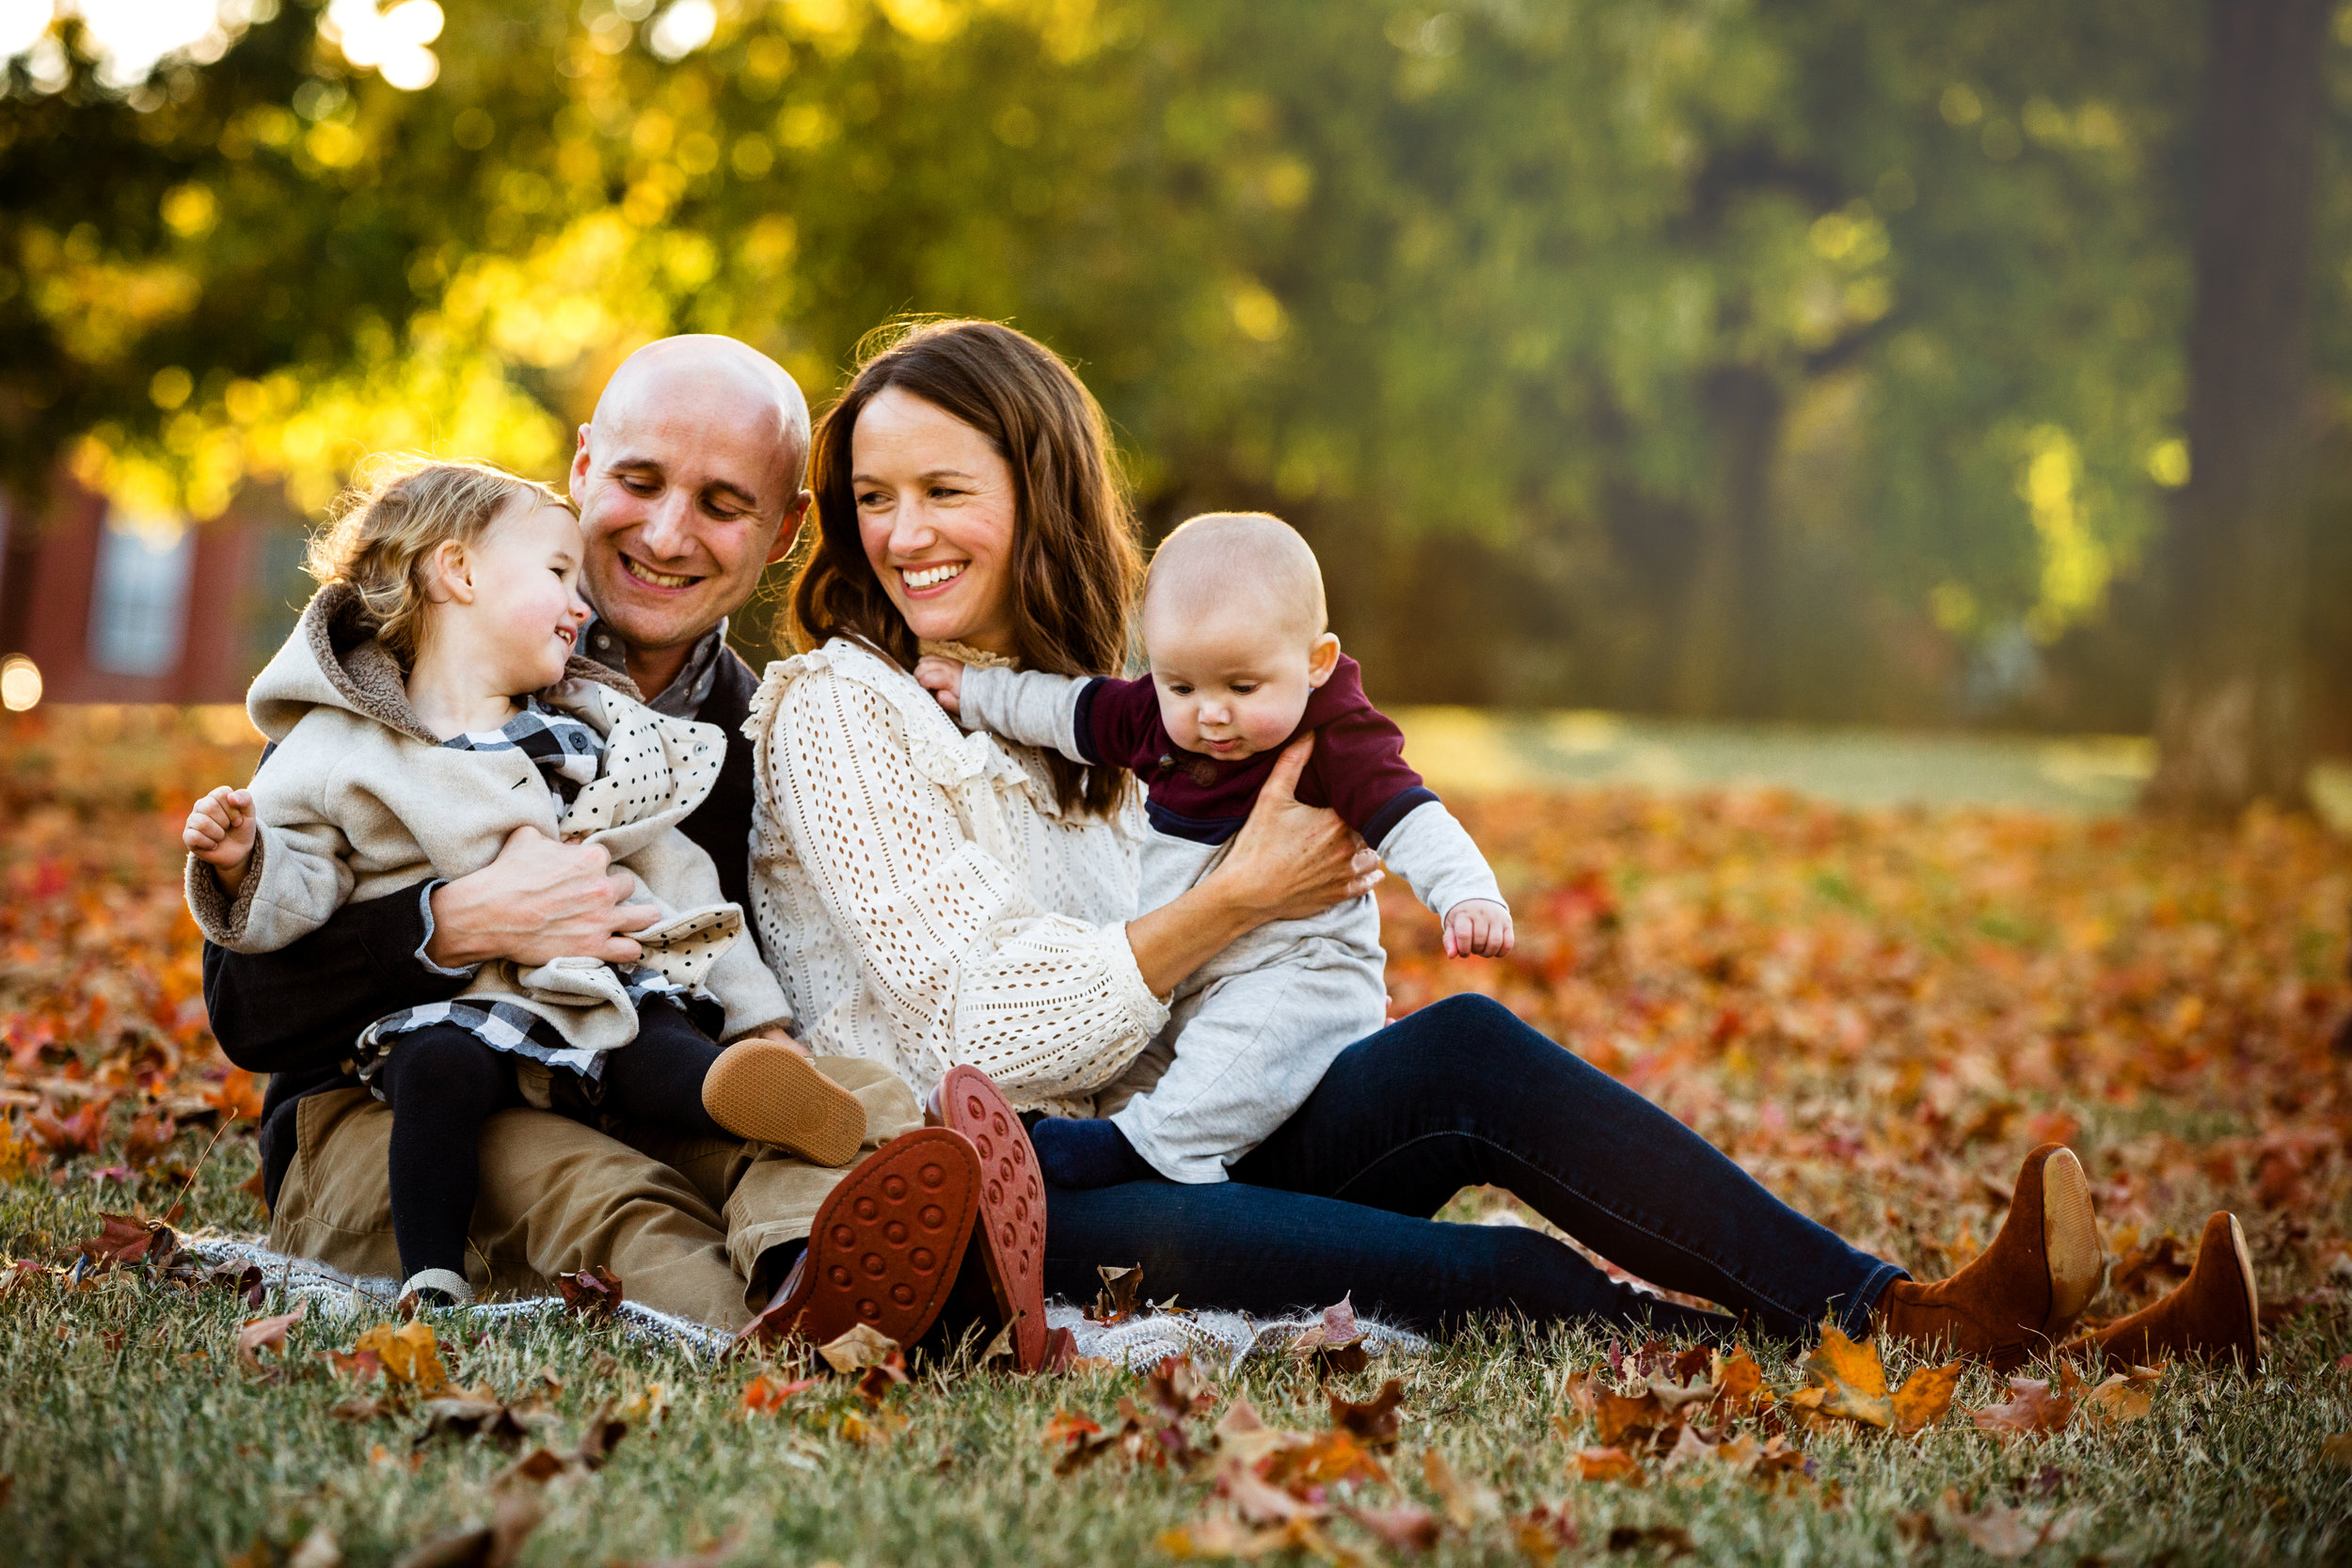 family of four, including dad, mom, daughter, and son, smile at each other while seated on grass amidst leaves